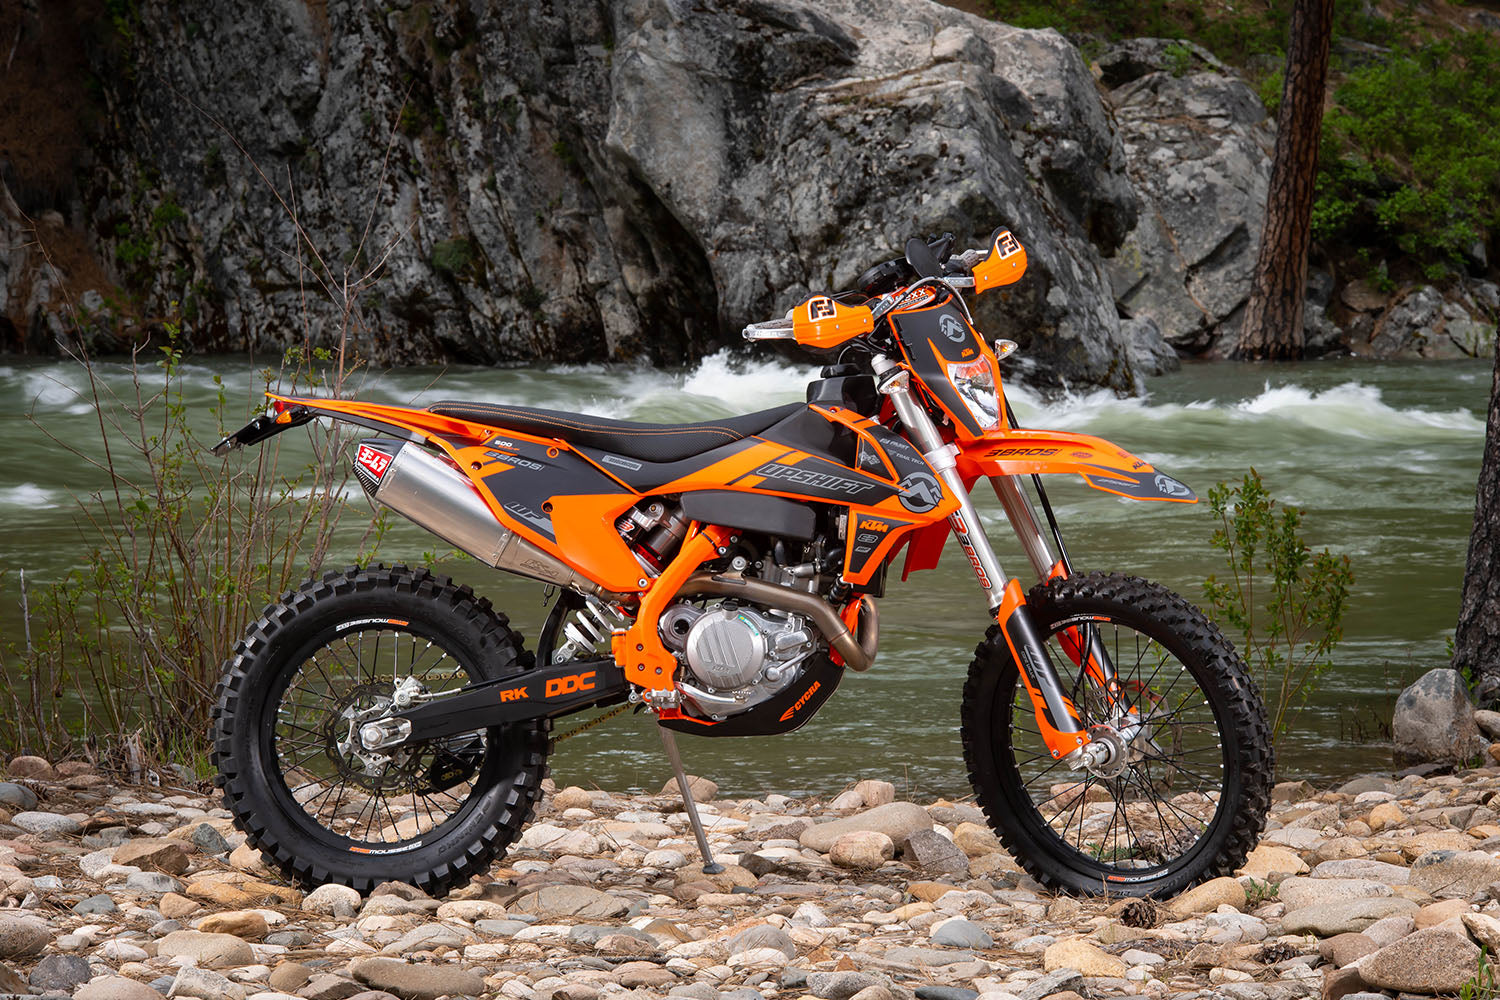 2019 EXC 500 PROJECT BIKE